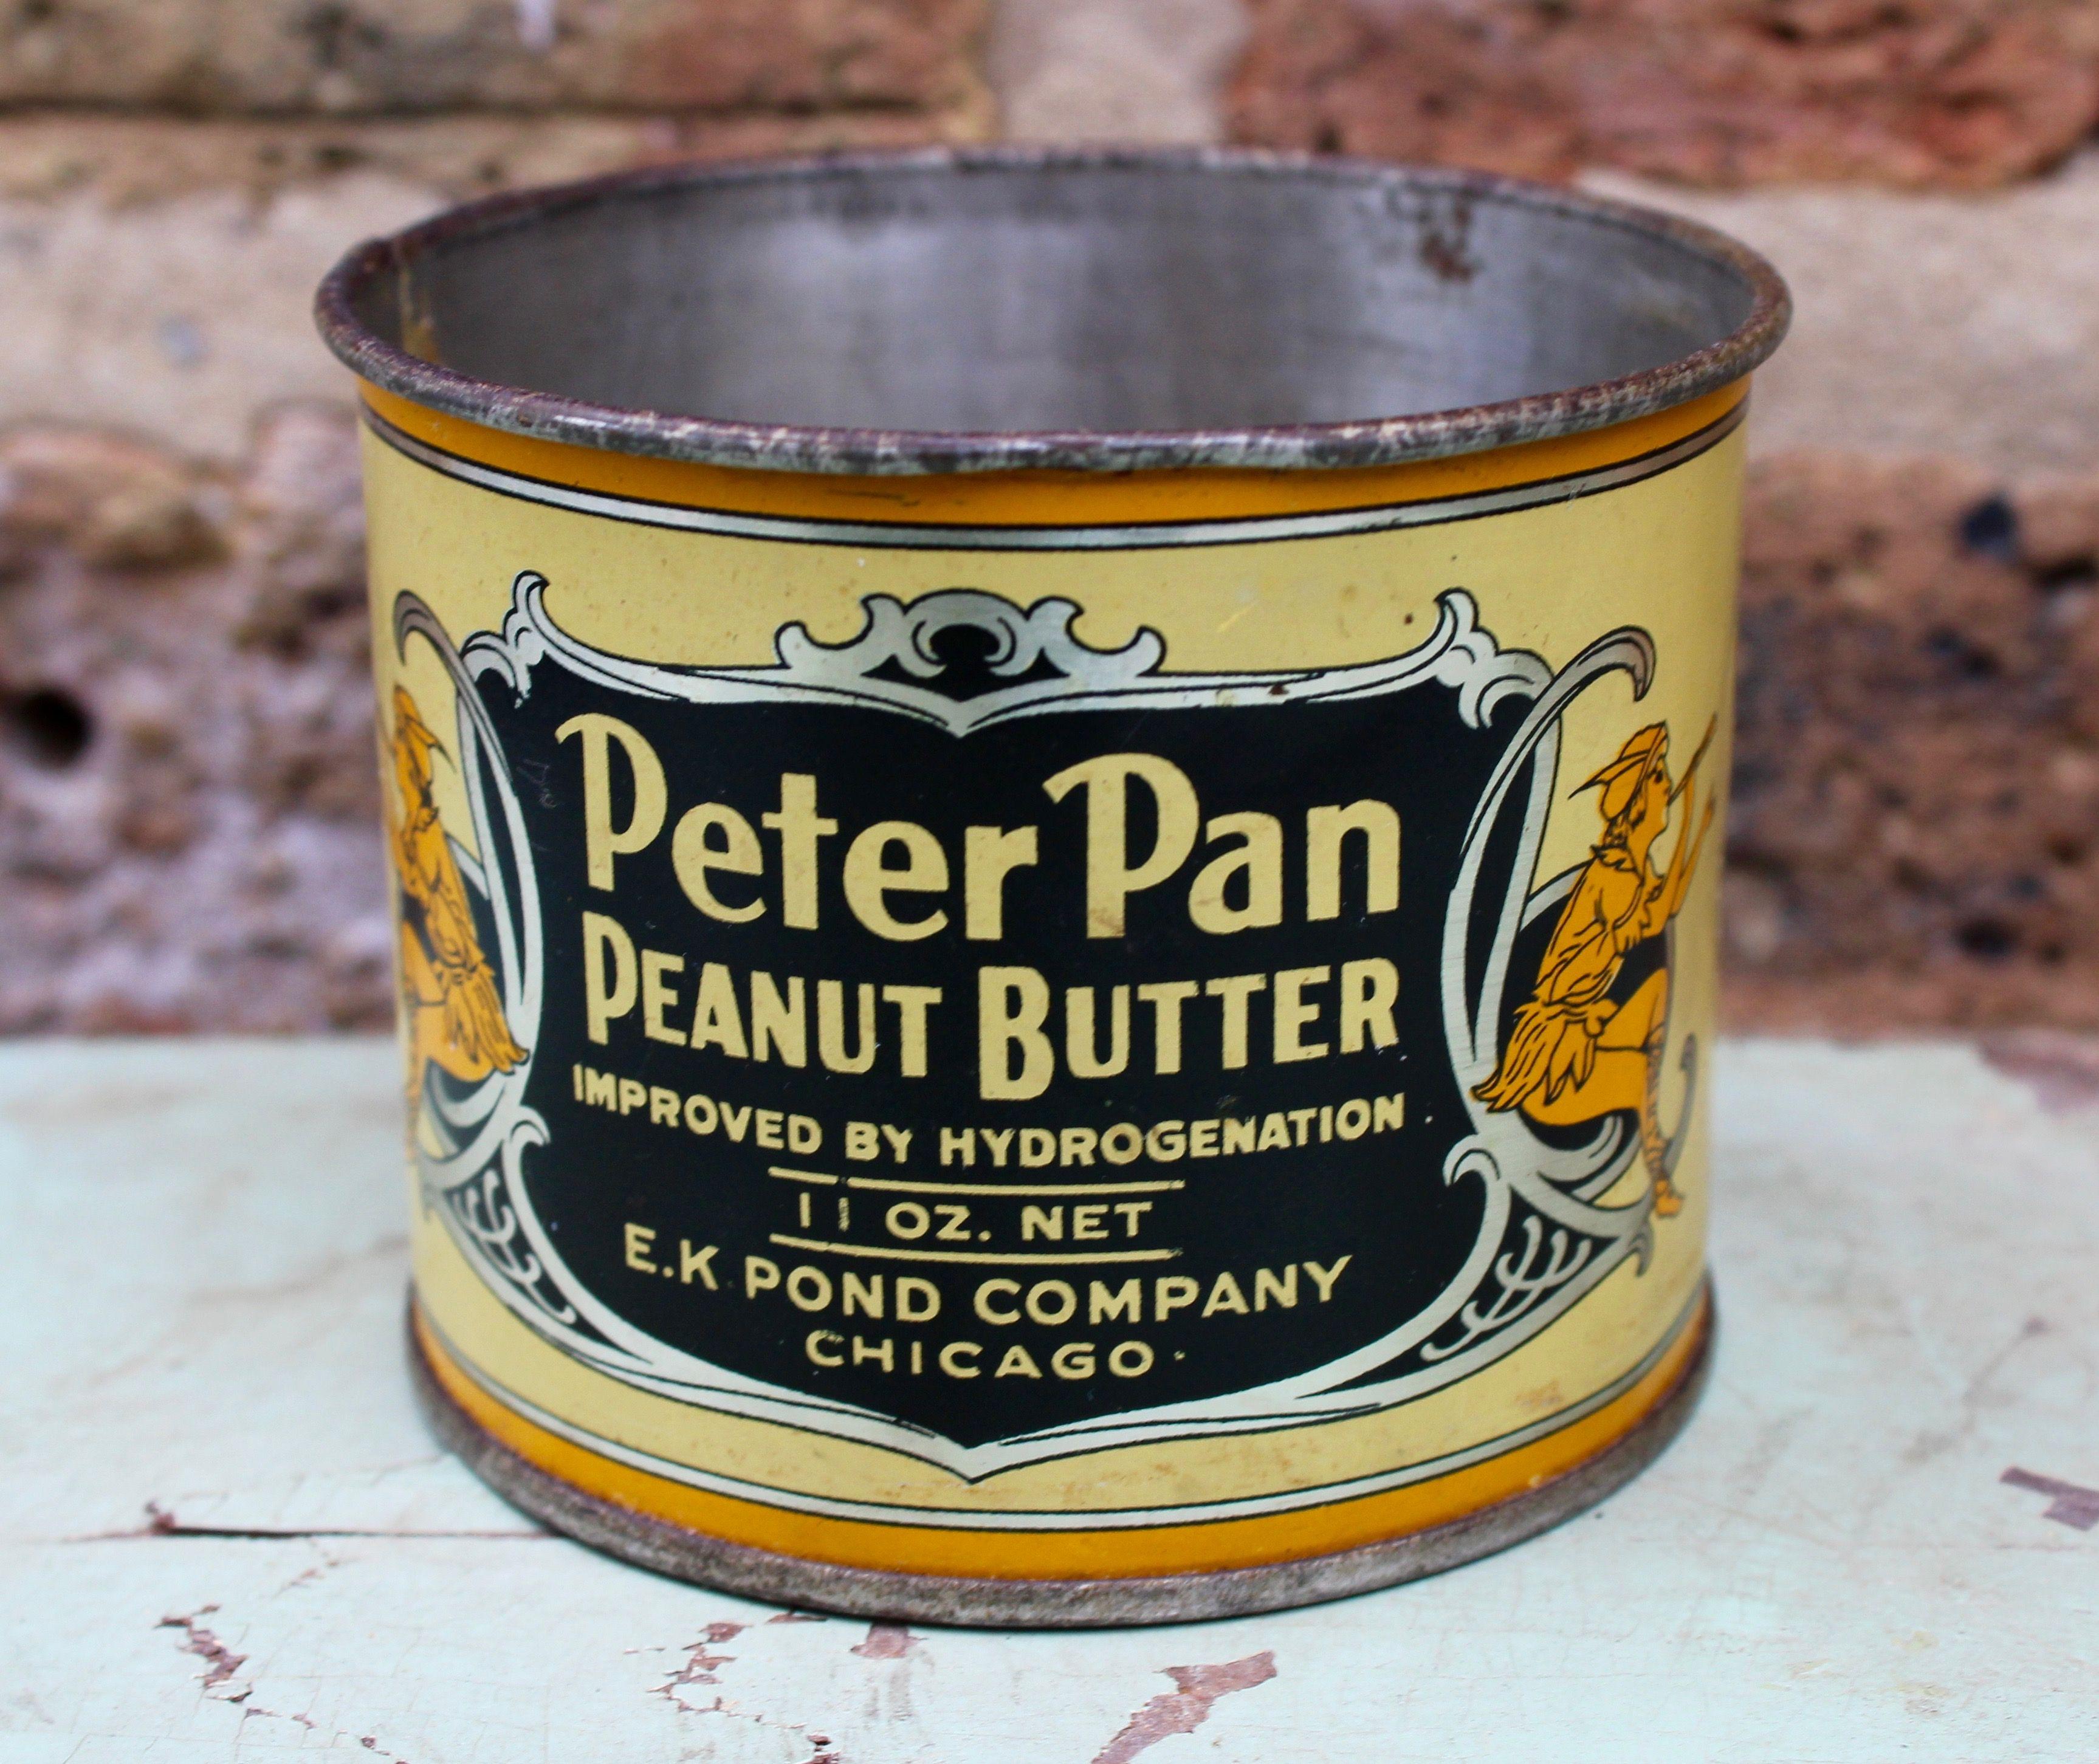 Peter Pan Peanut Butter Logo - History Of Peter Pan Peanut Butter & The E. K. Pond Co. Made In